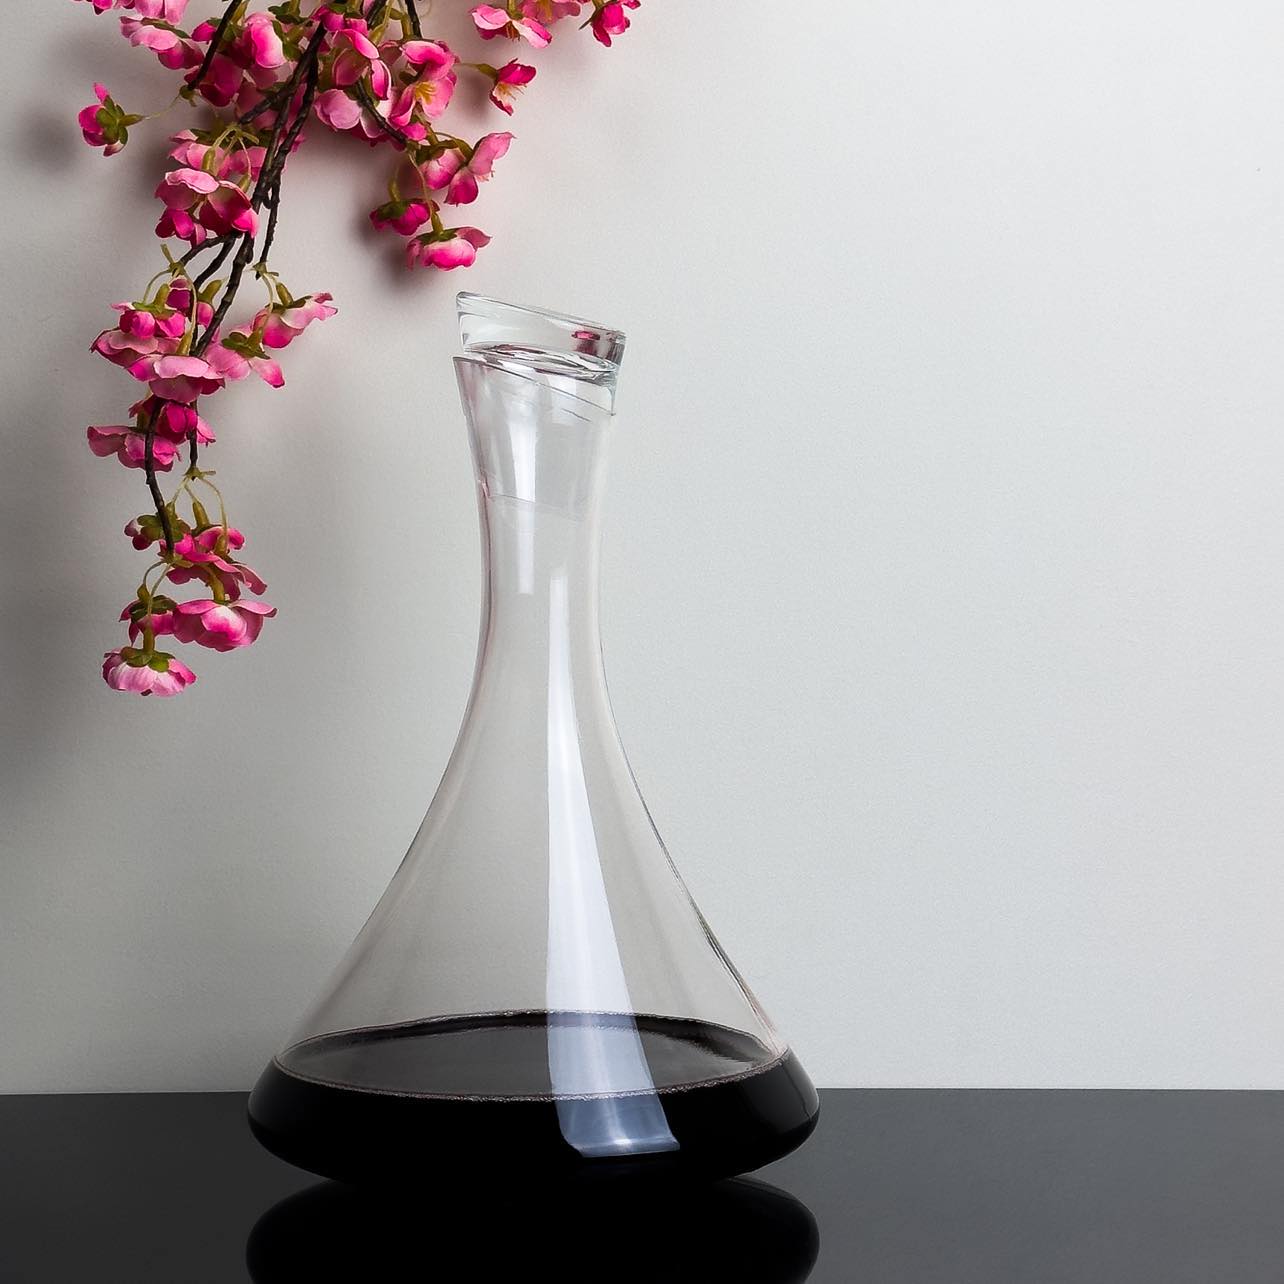 The Jett Wine Decanter Hand Blown Glass With Glass Lid